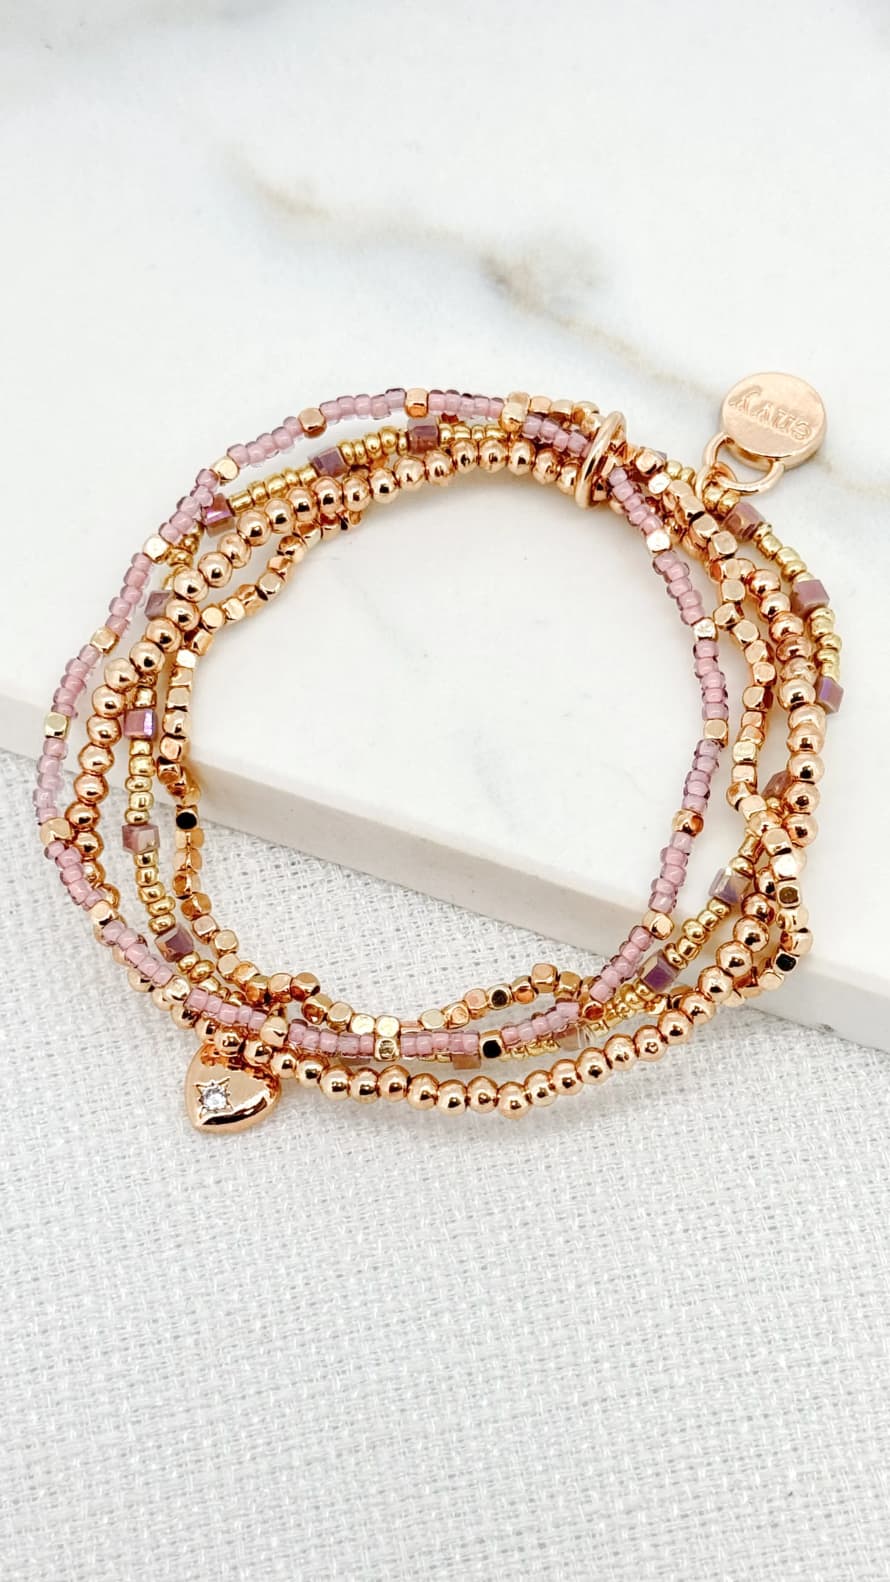 Envy Gold and Pink Bead Bracelet with Heart Charm